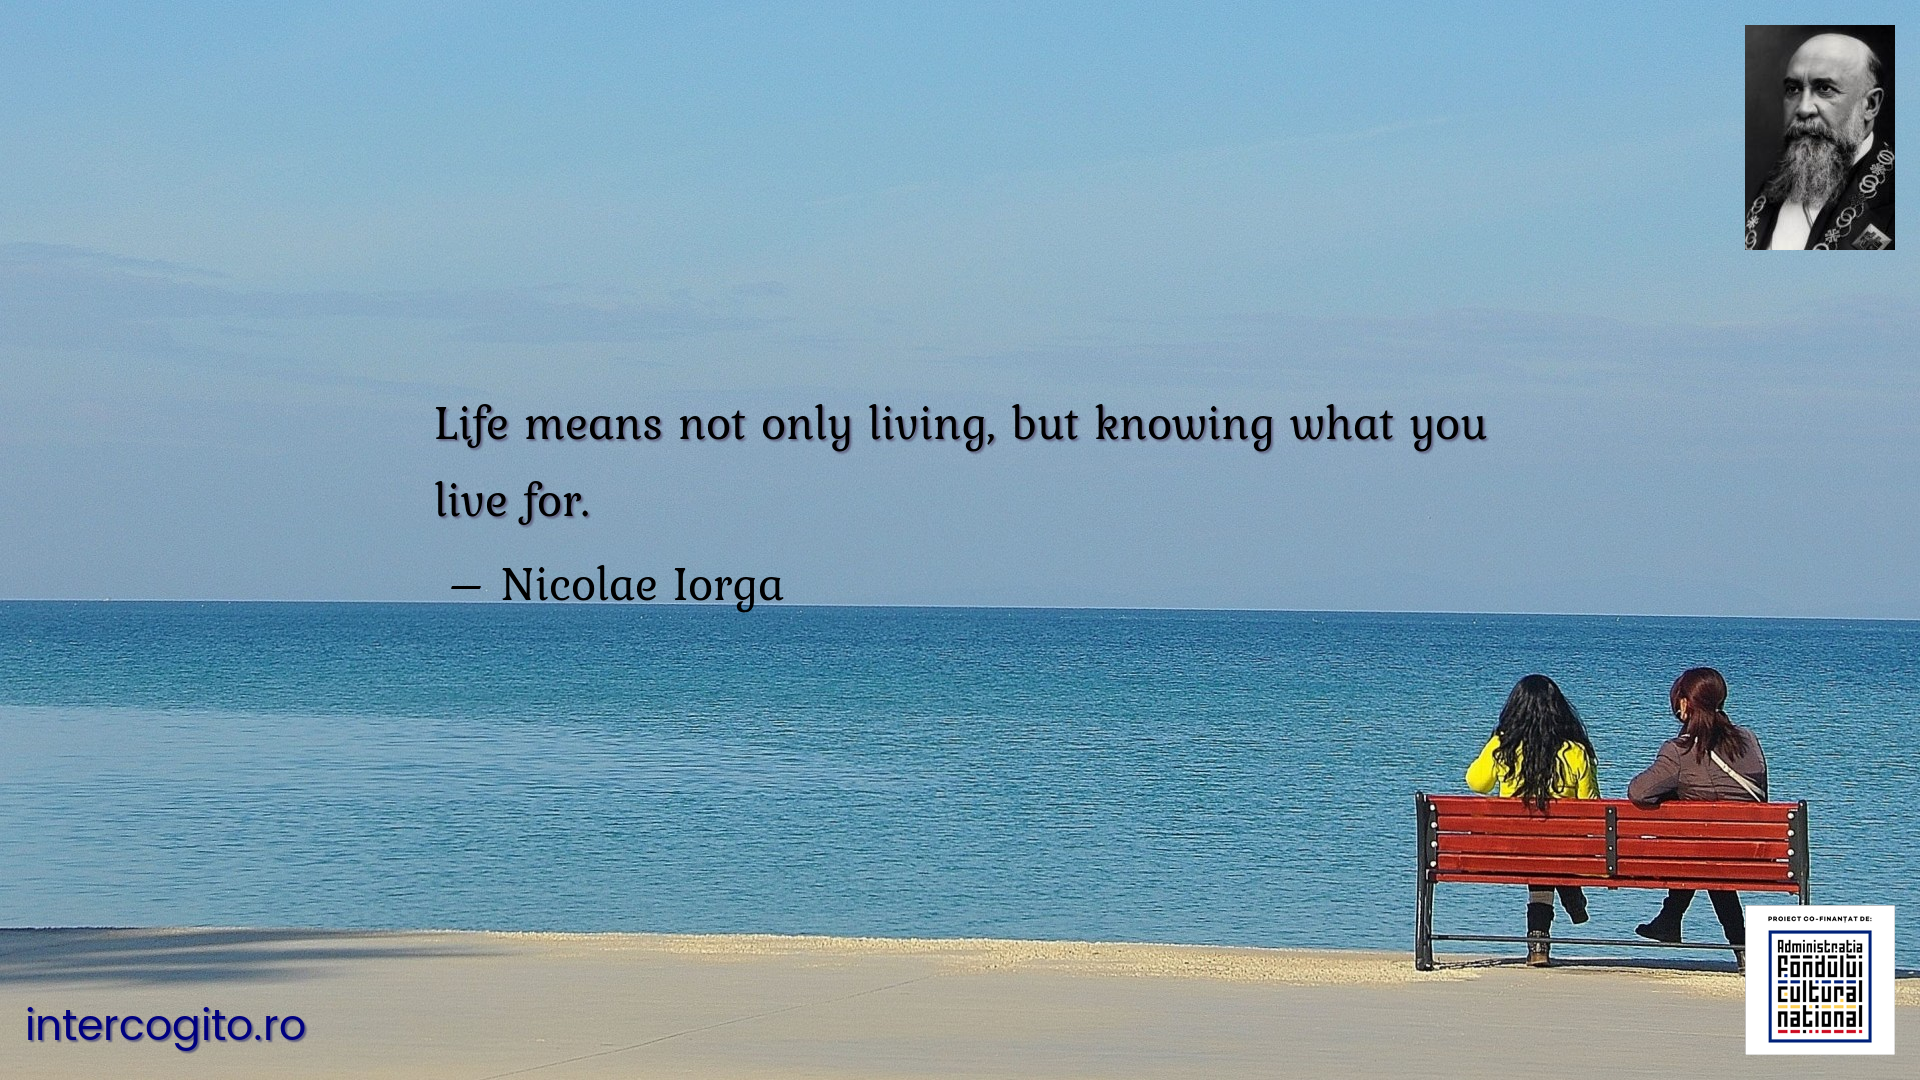 Life means not only living, but knowing what you live for.